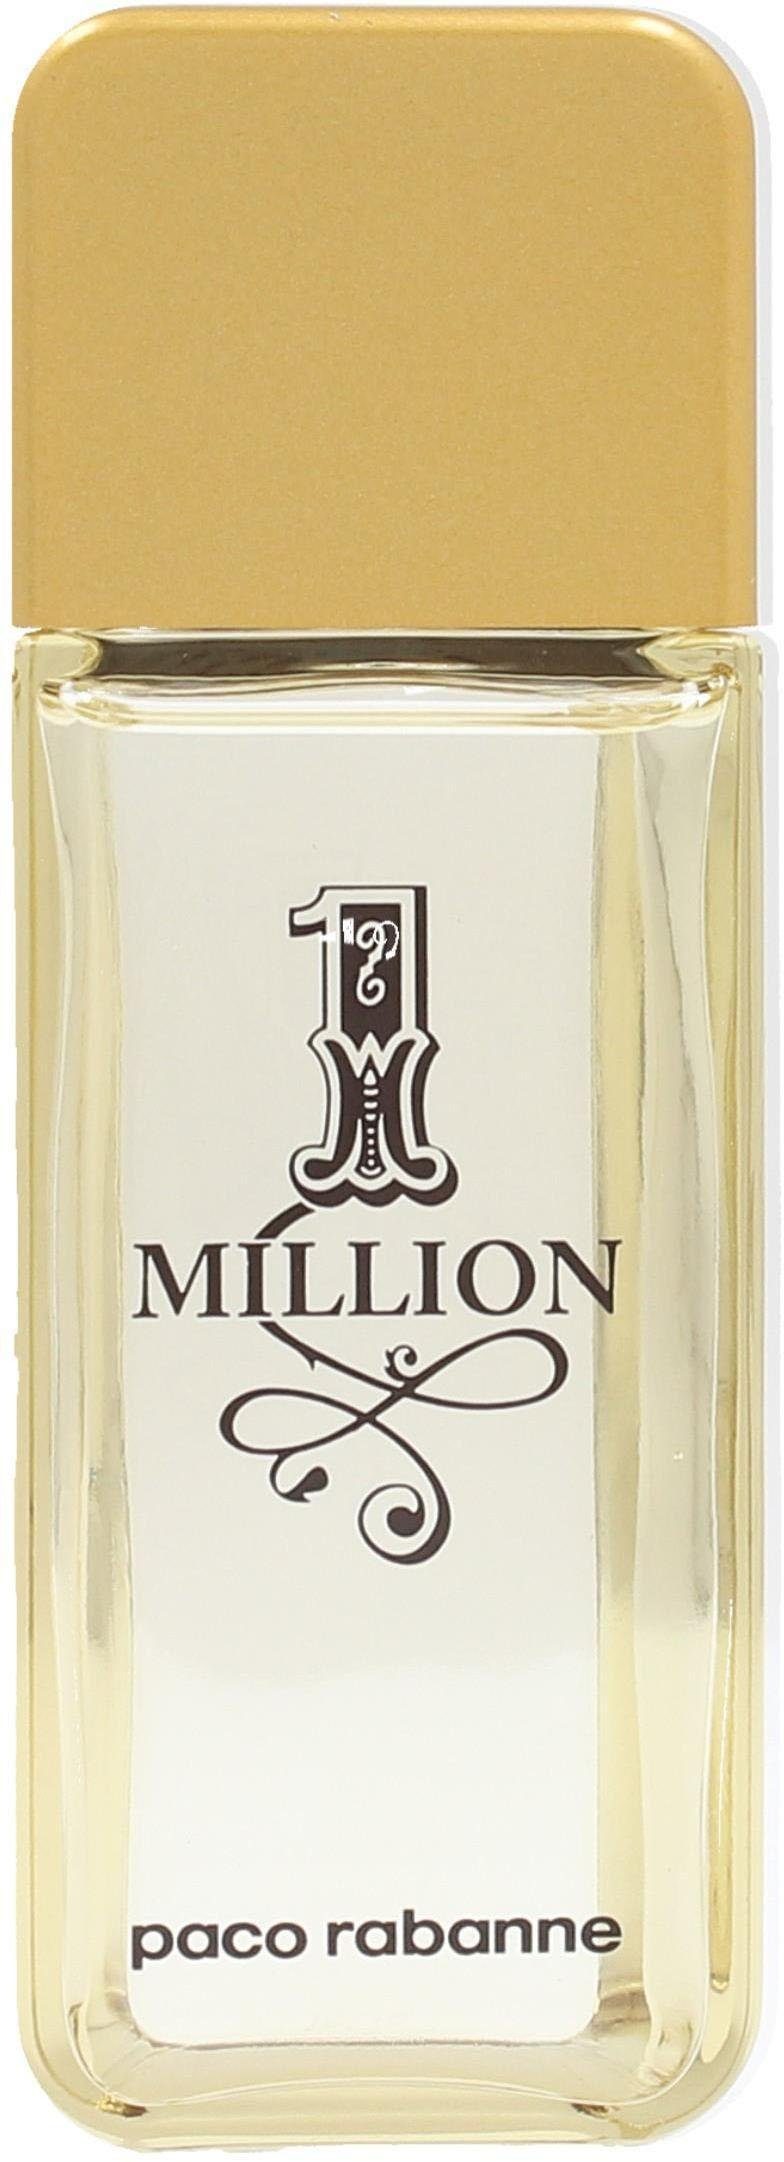 Million rabanne After-Shave 1 paco